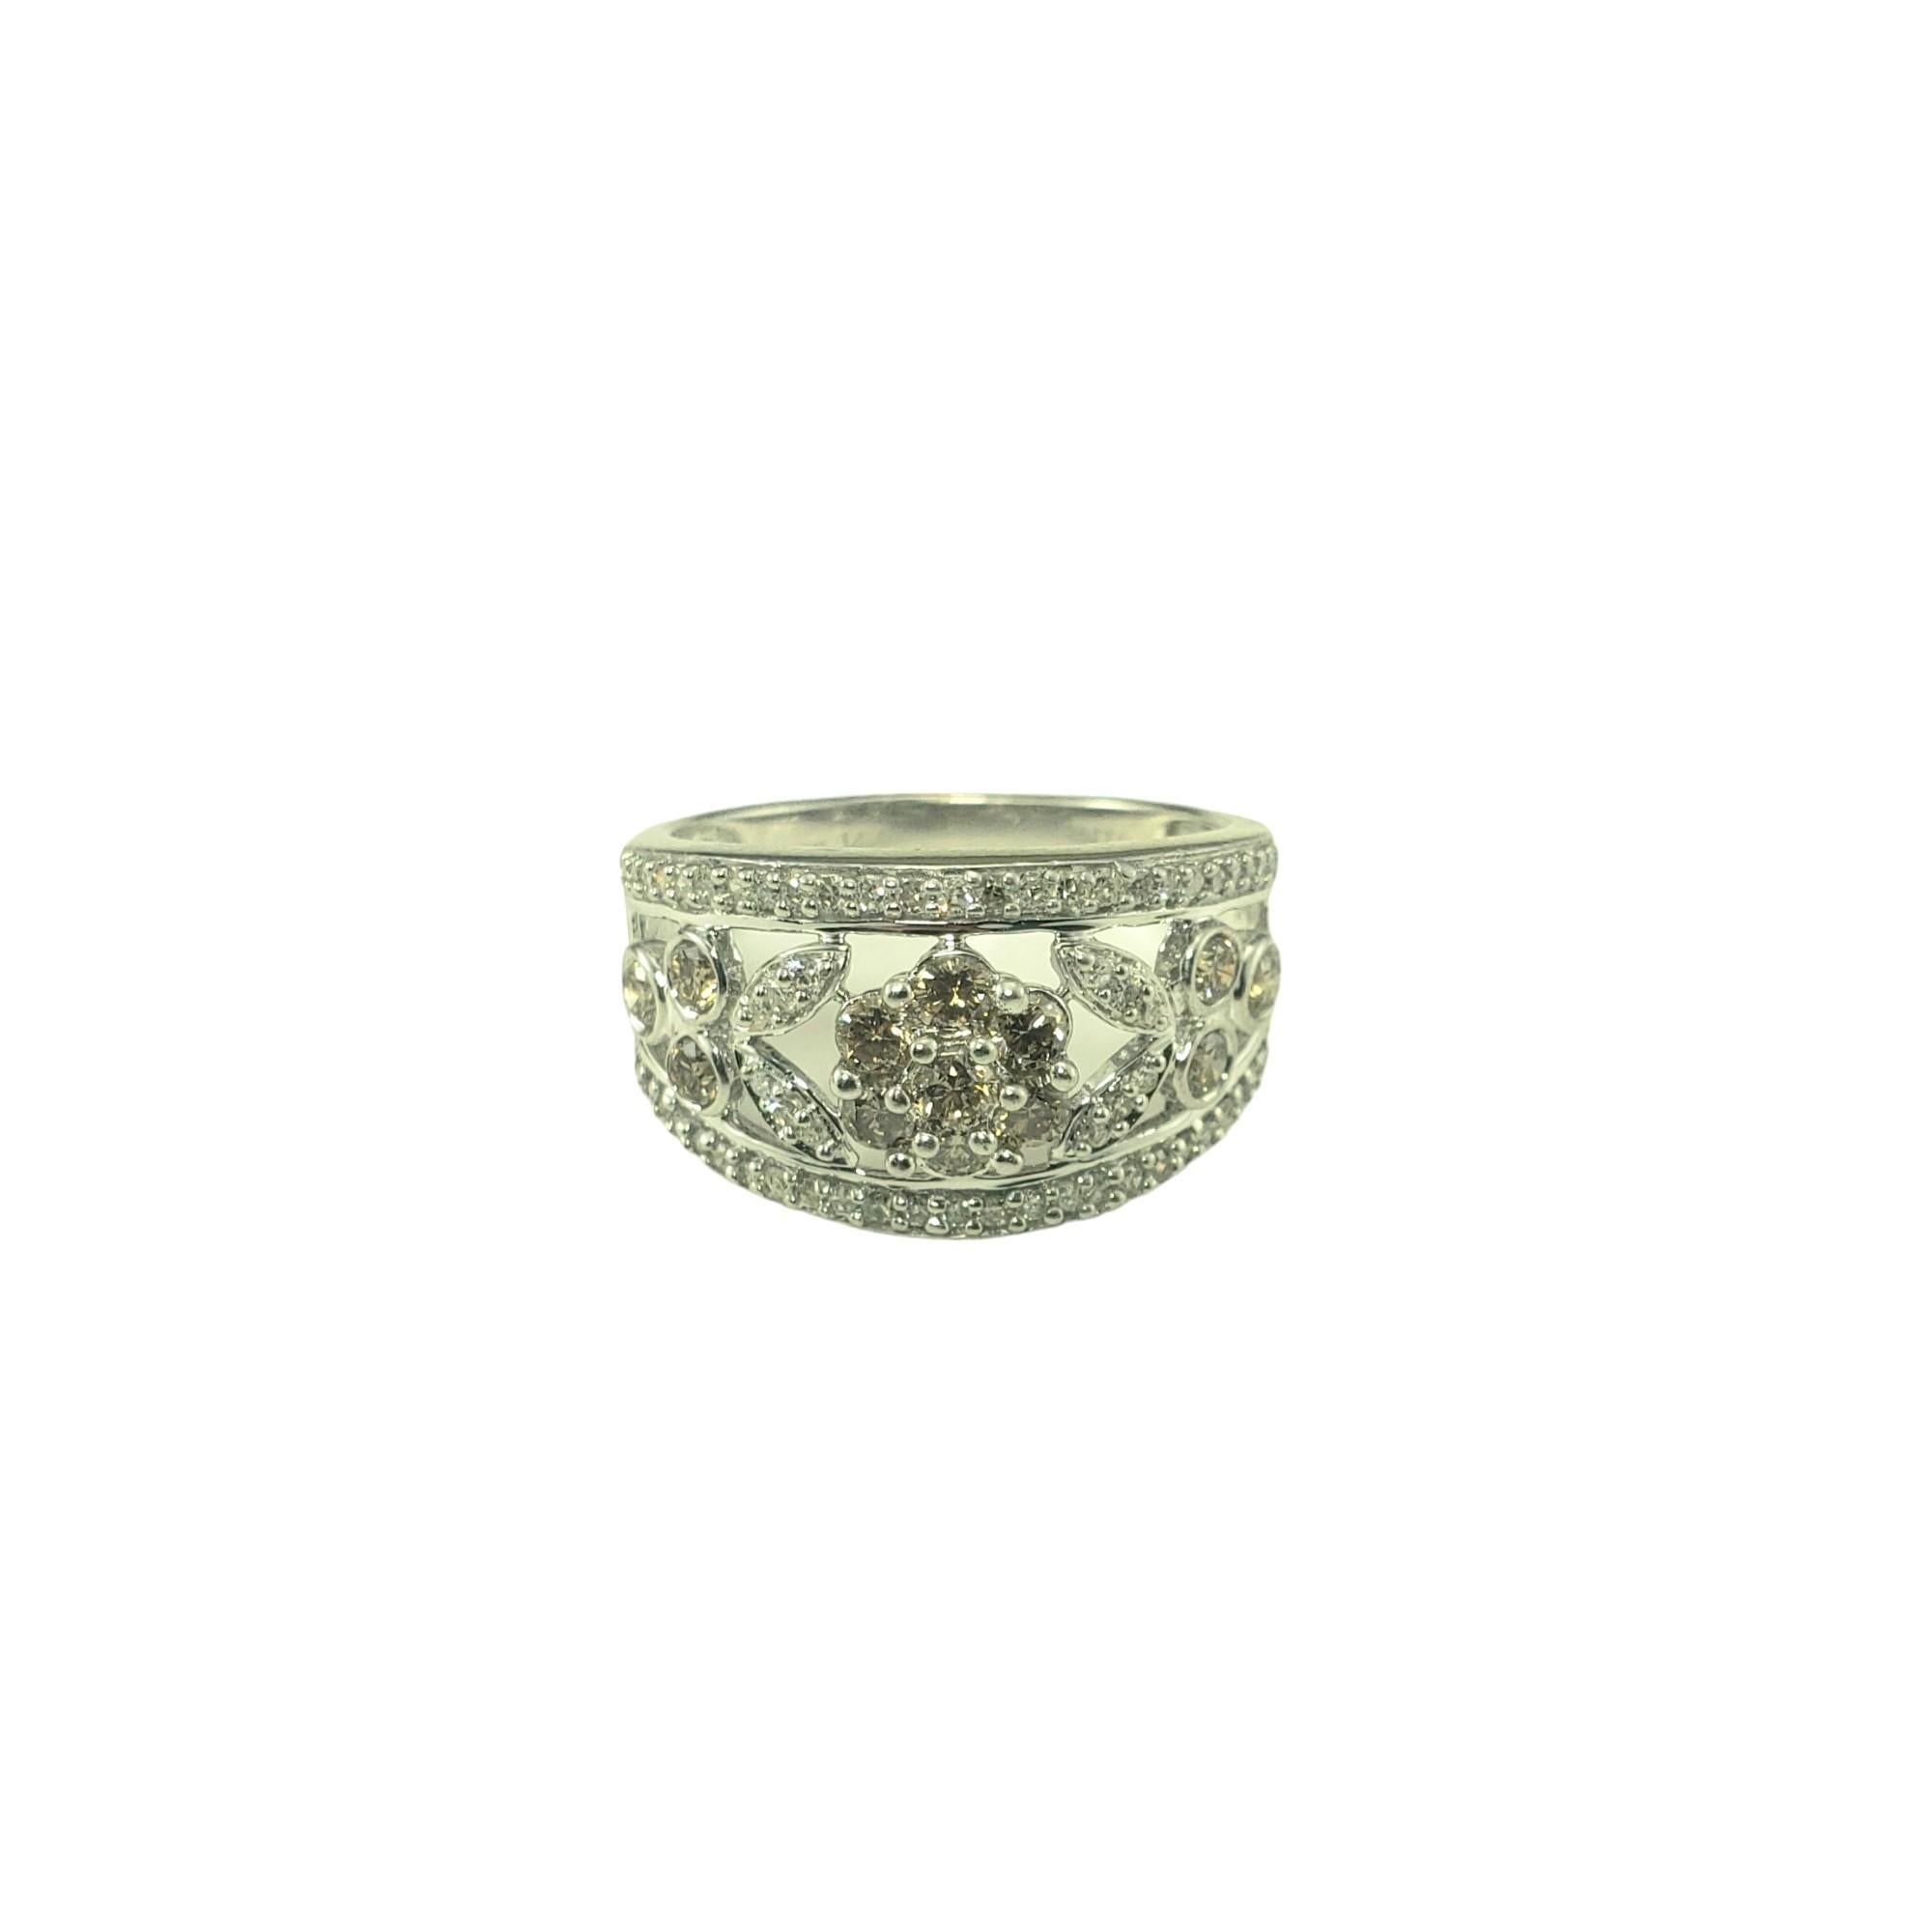 14 Karat White Gold Floral Diamond Band Ring Size 7.5-

This sparkling band features 13 round champagne diamonds and 62 round single cut diamonds set in beautifully open detailed 14K white gold.  

Width: 13 mm.  Shank: 2.5 mm.

Approximate total